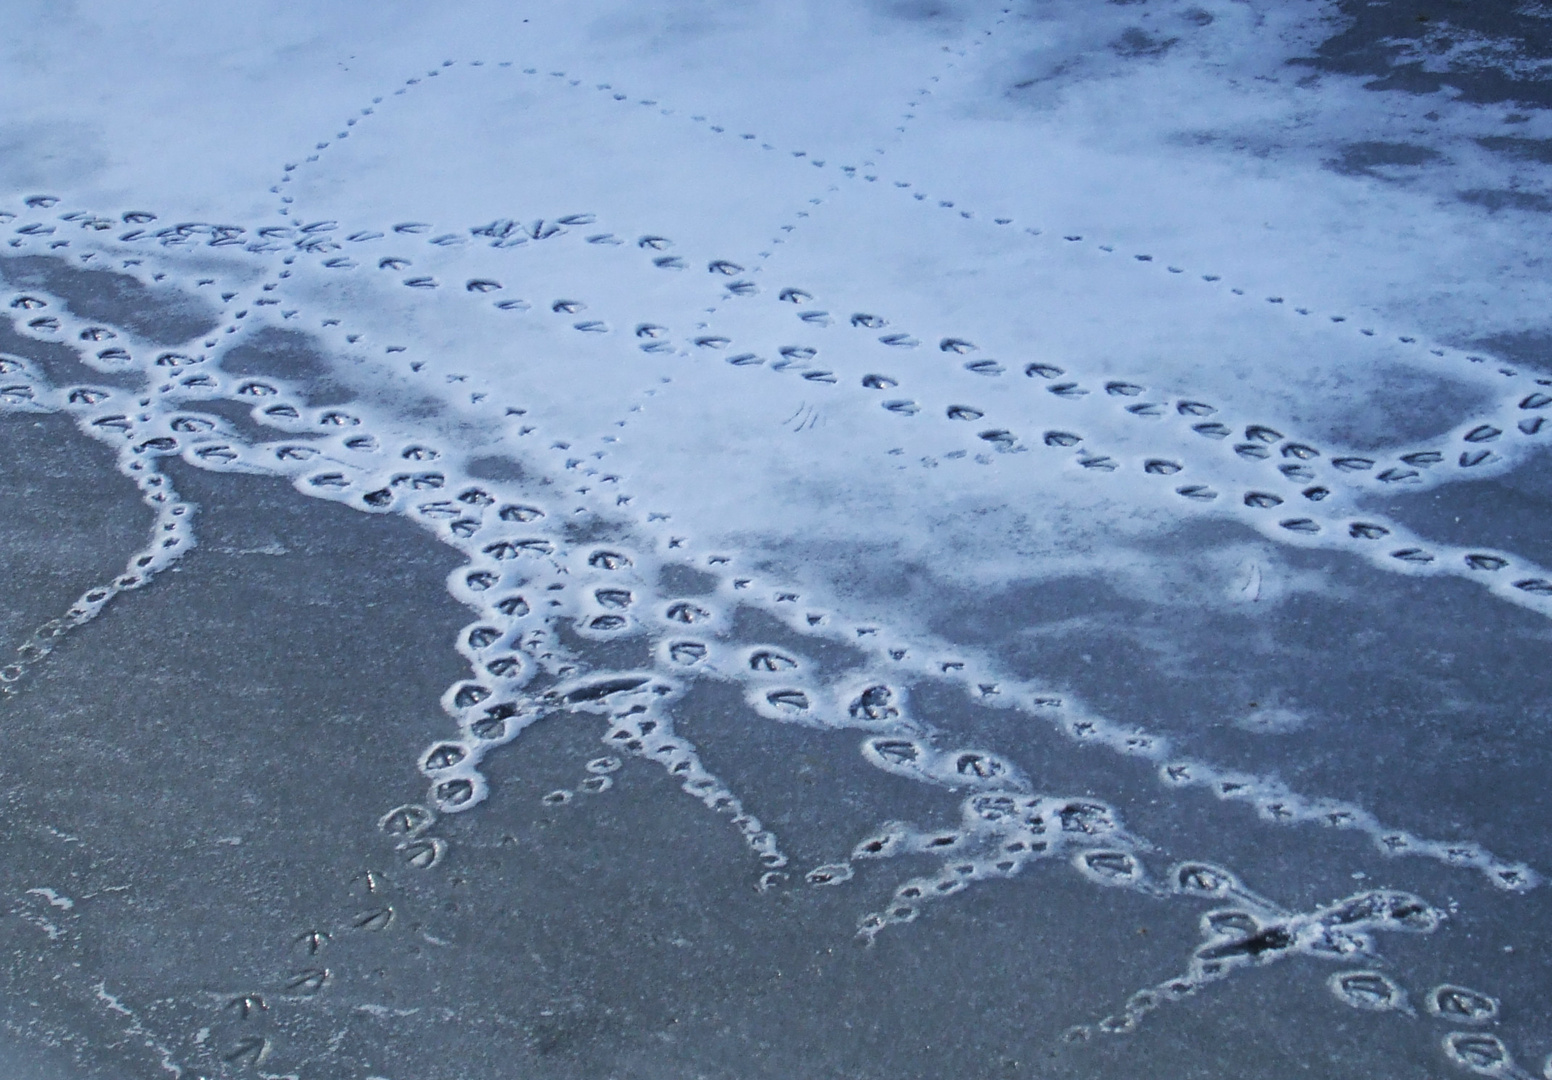 bird trails in the melting snow